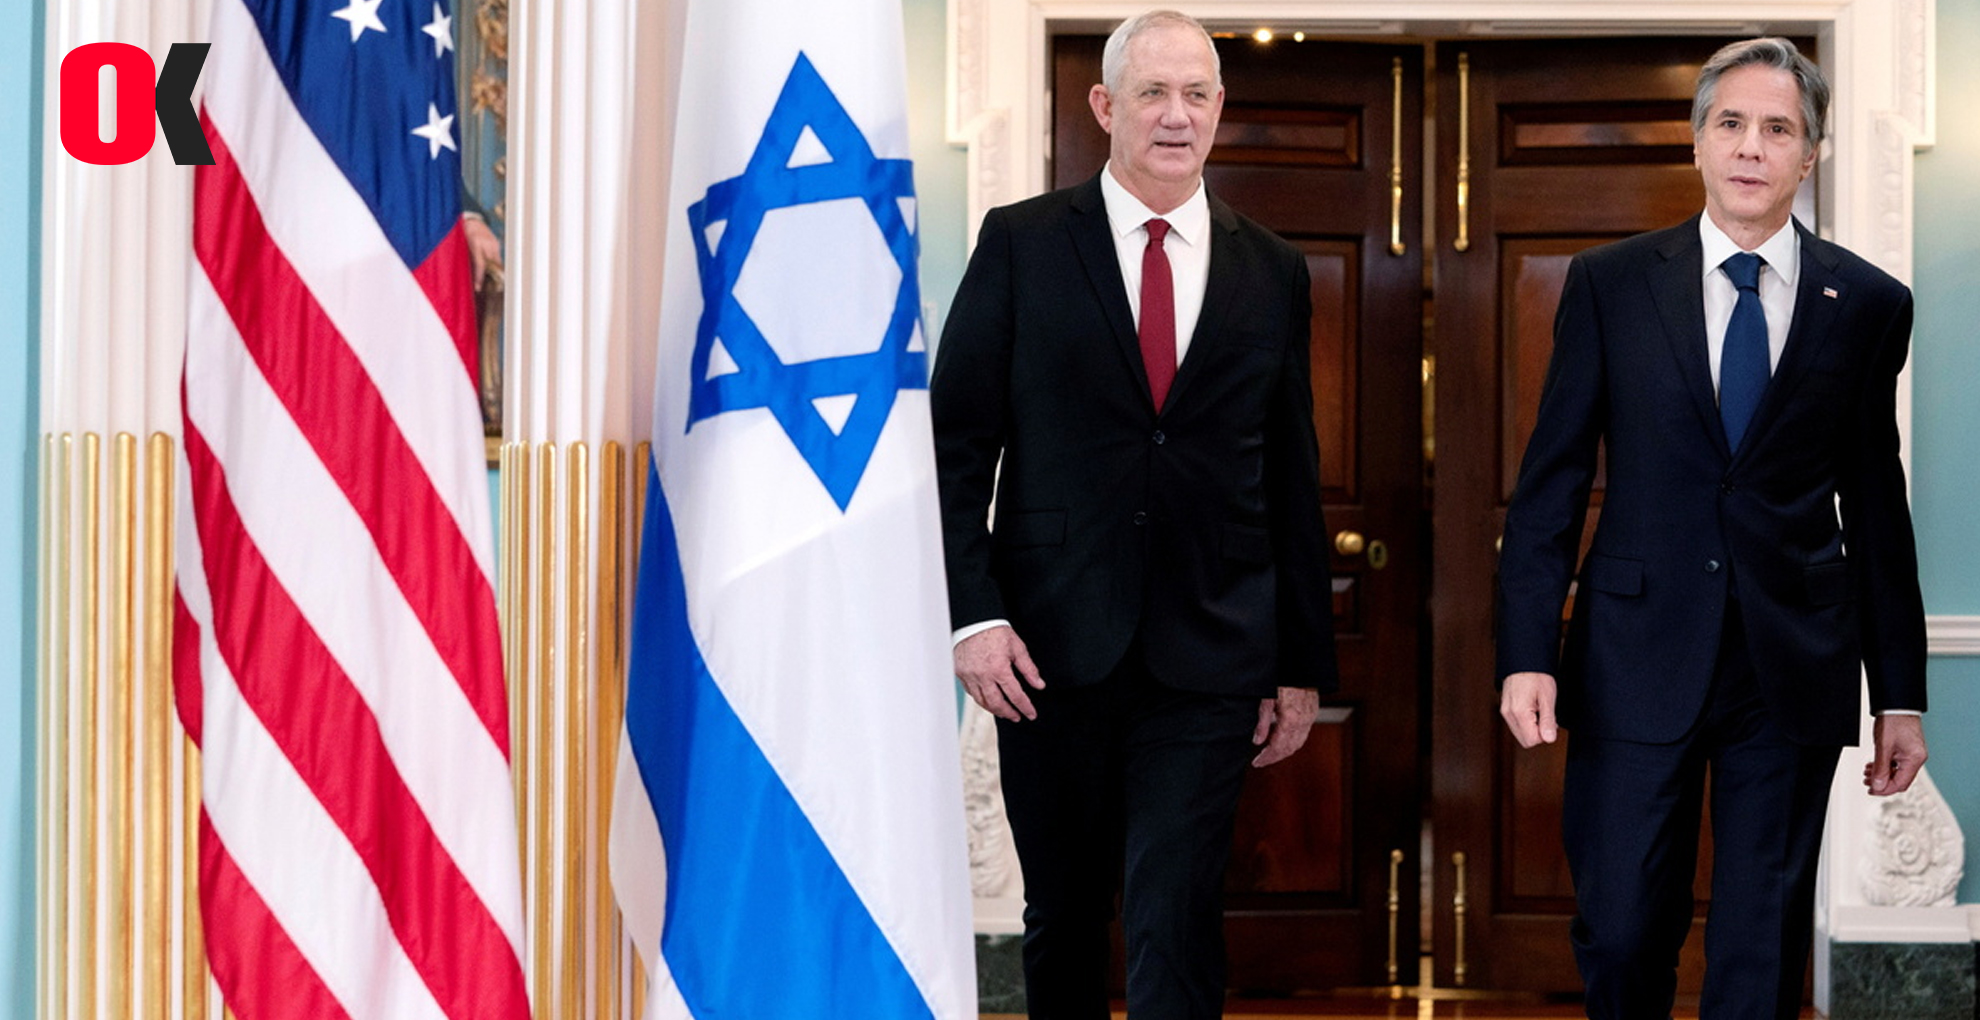 The Biden administration reaffirms its commitment to Israel’s security